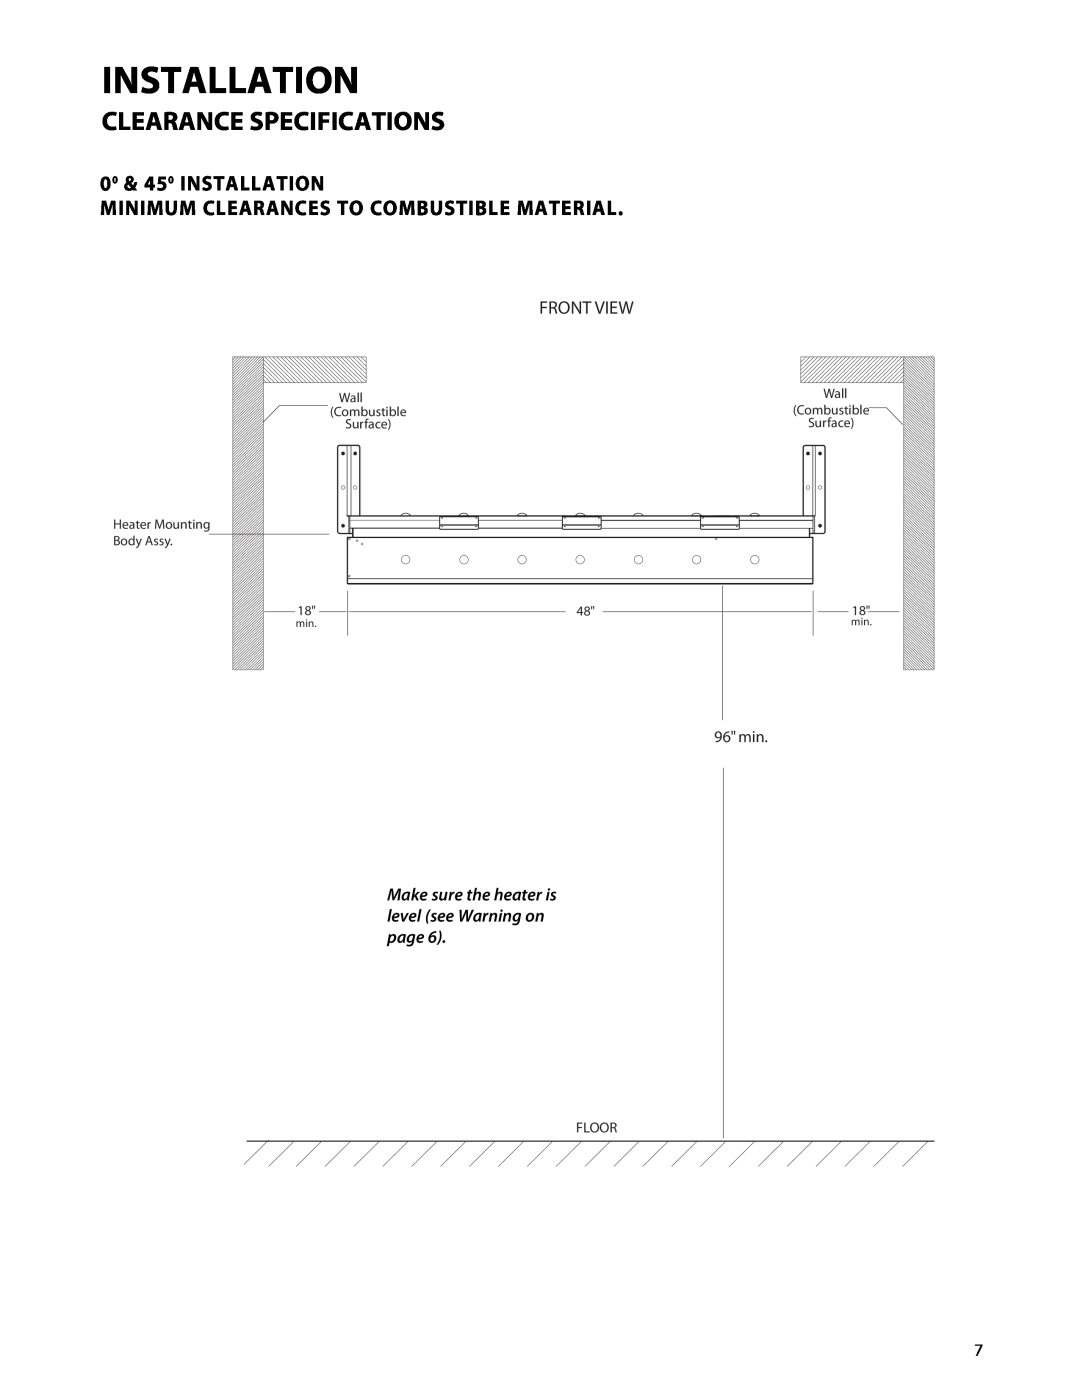 Fisher & Paykel DRH-48N Clearance Specifications, 00 & 450 INSTALLATION, Minimum Clearances To Combustible Material, Wall 